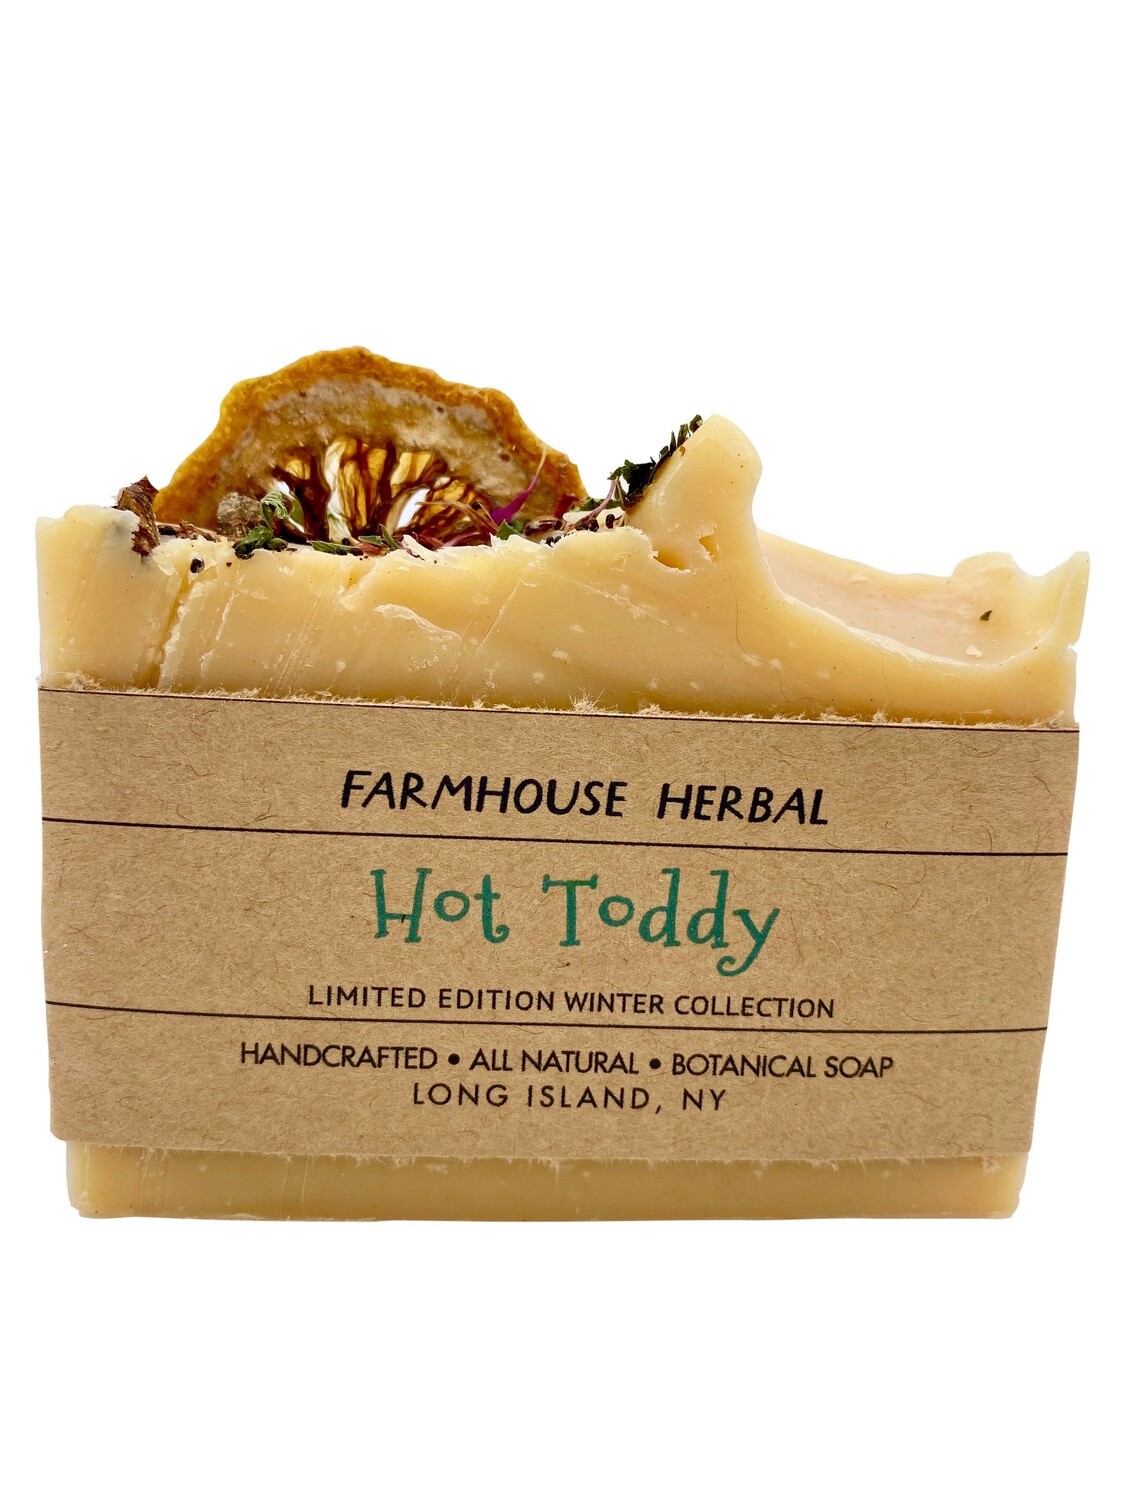 Farmhouse Herbal Hot Toddy Soap